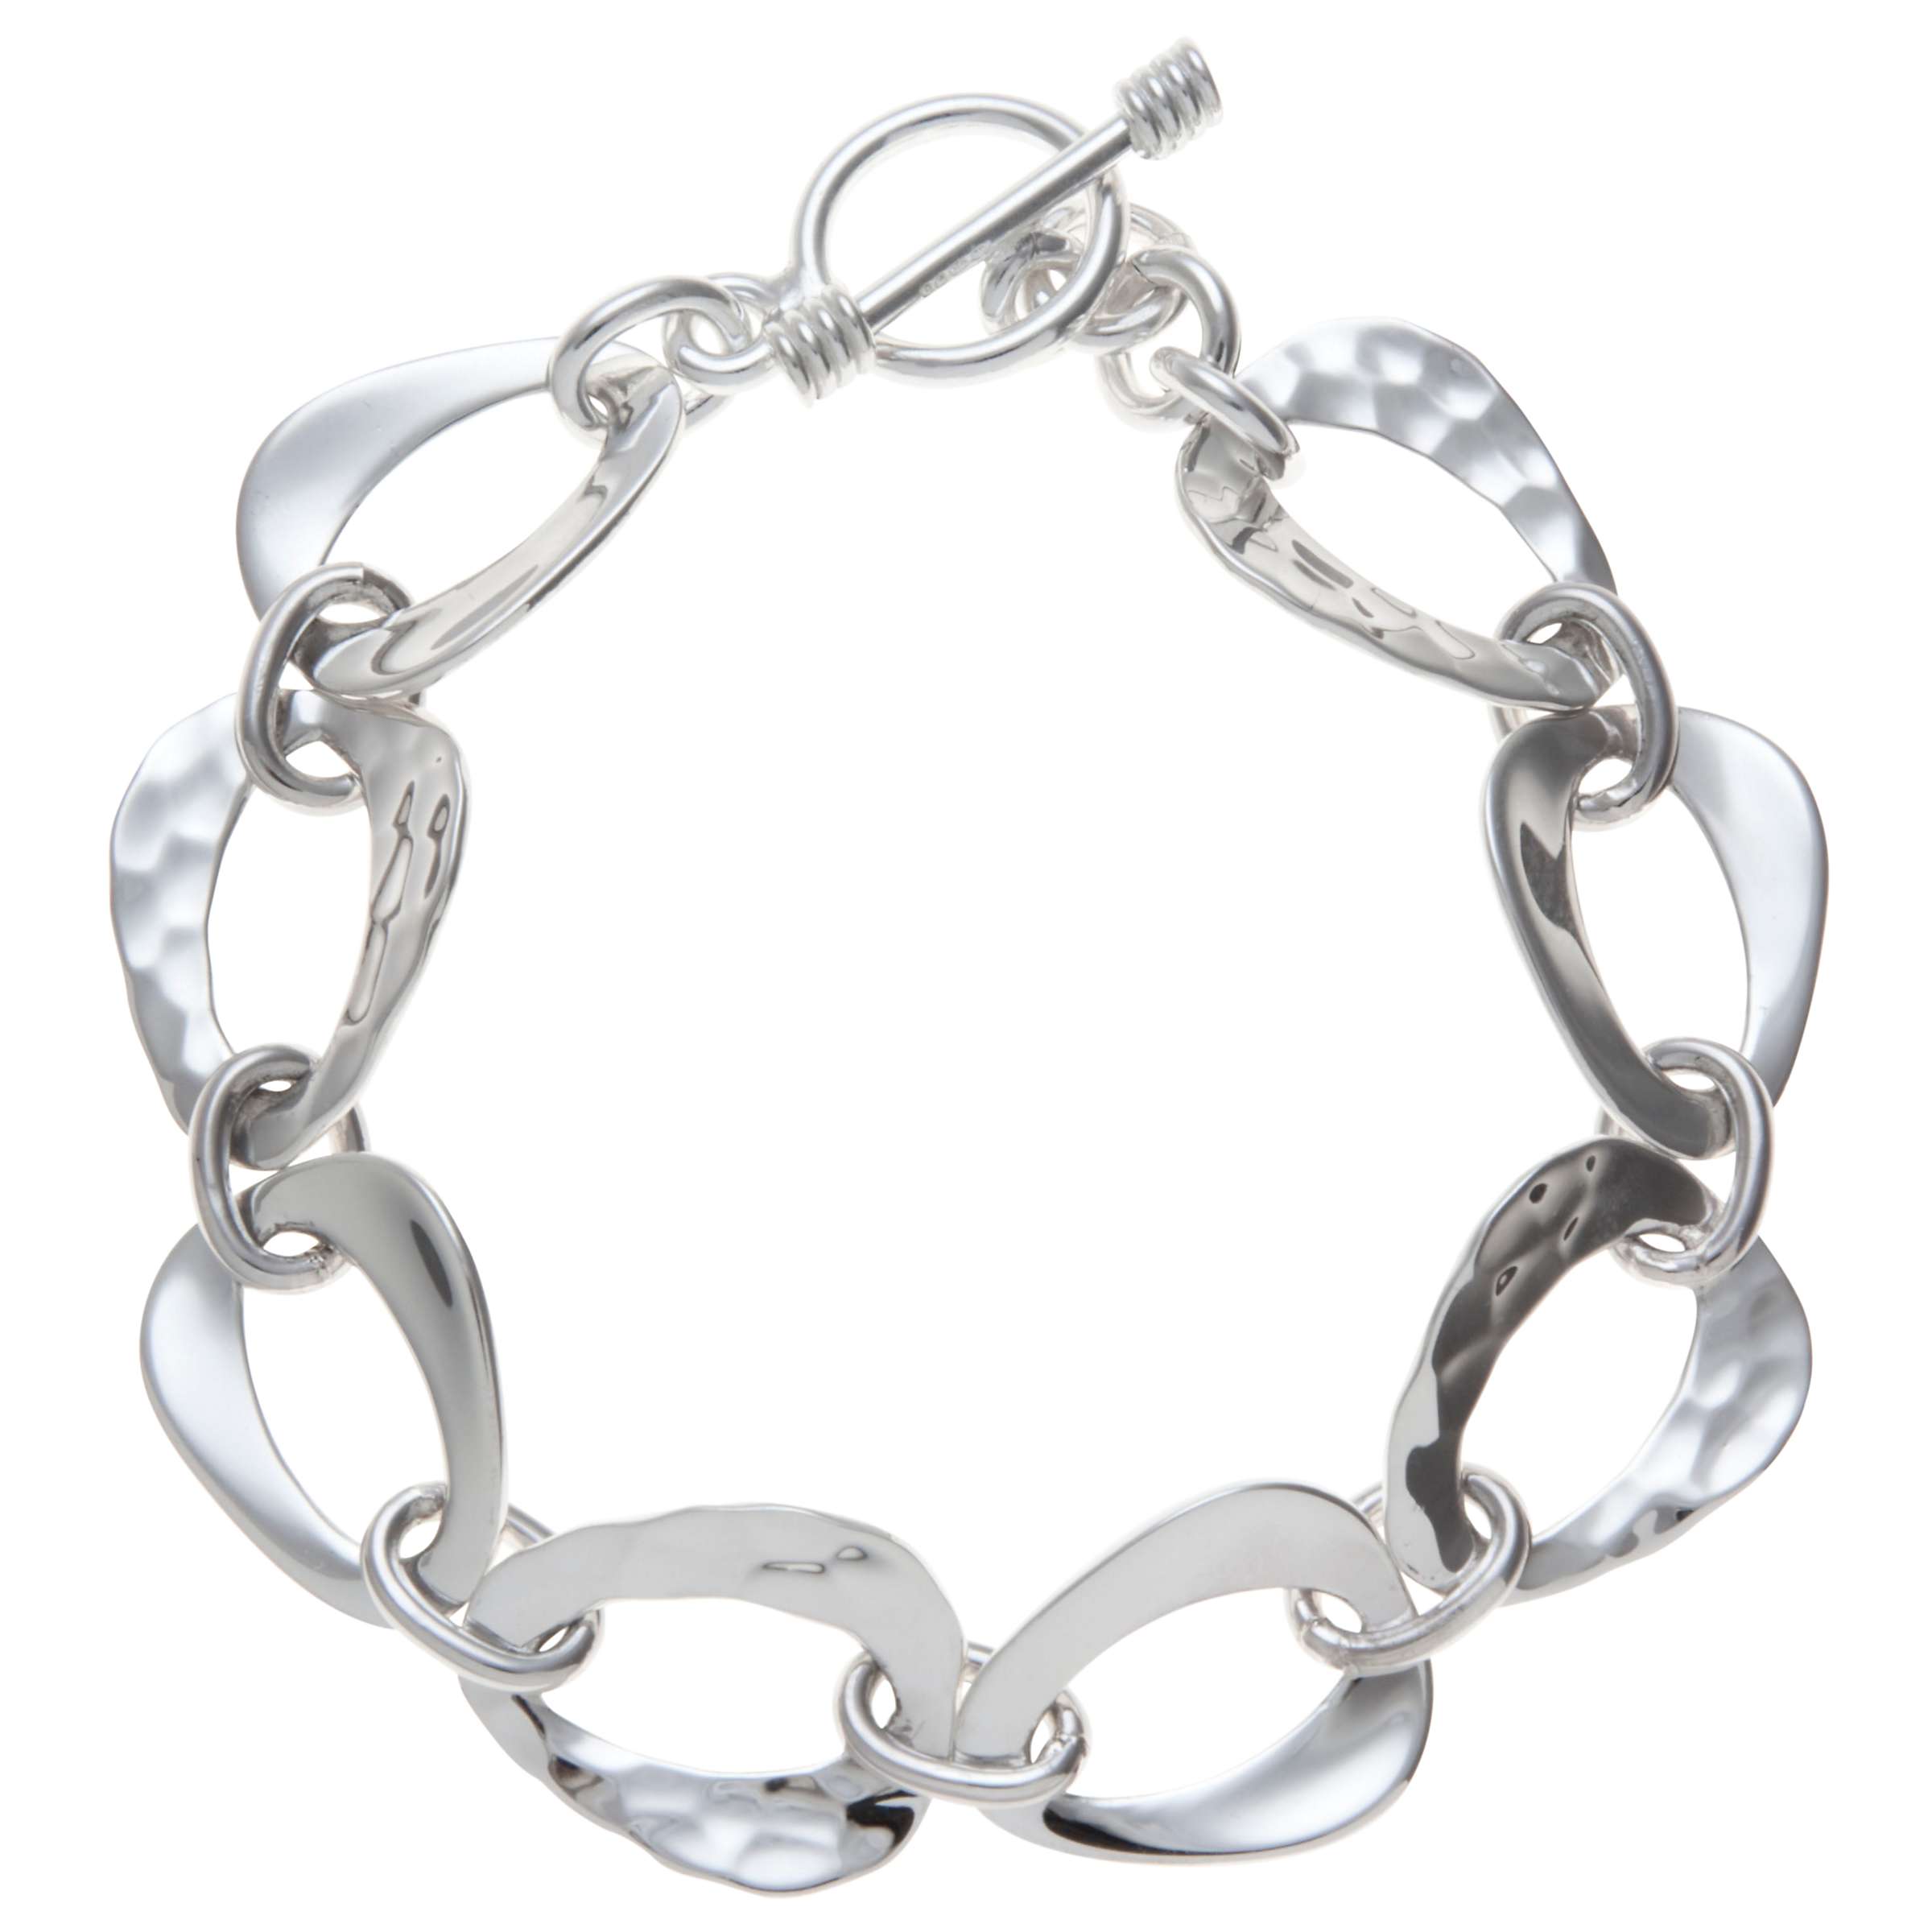 Buy Andea Sterling Silver Smooth And Textured Triangle Bracelet Online at johnlewis.com